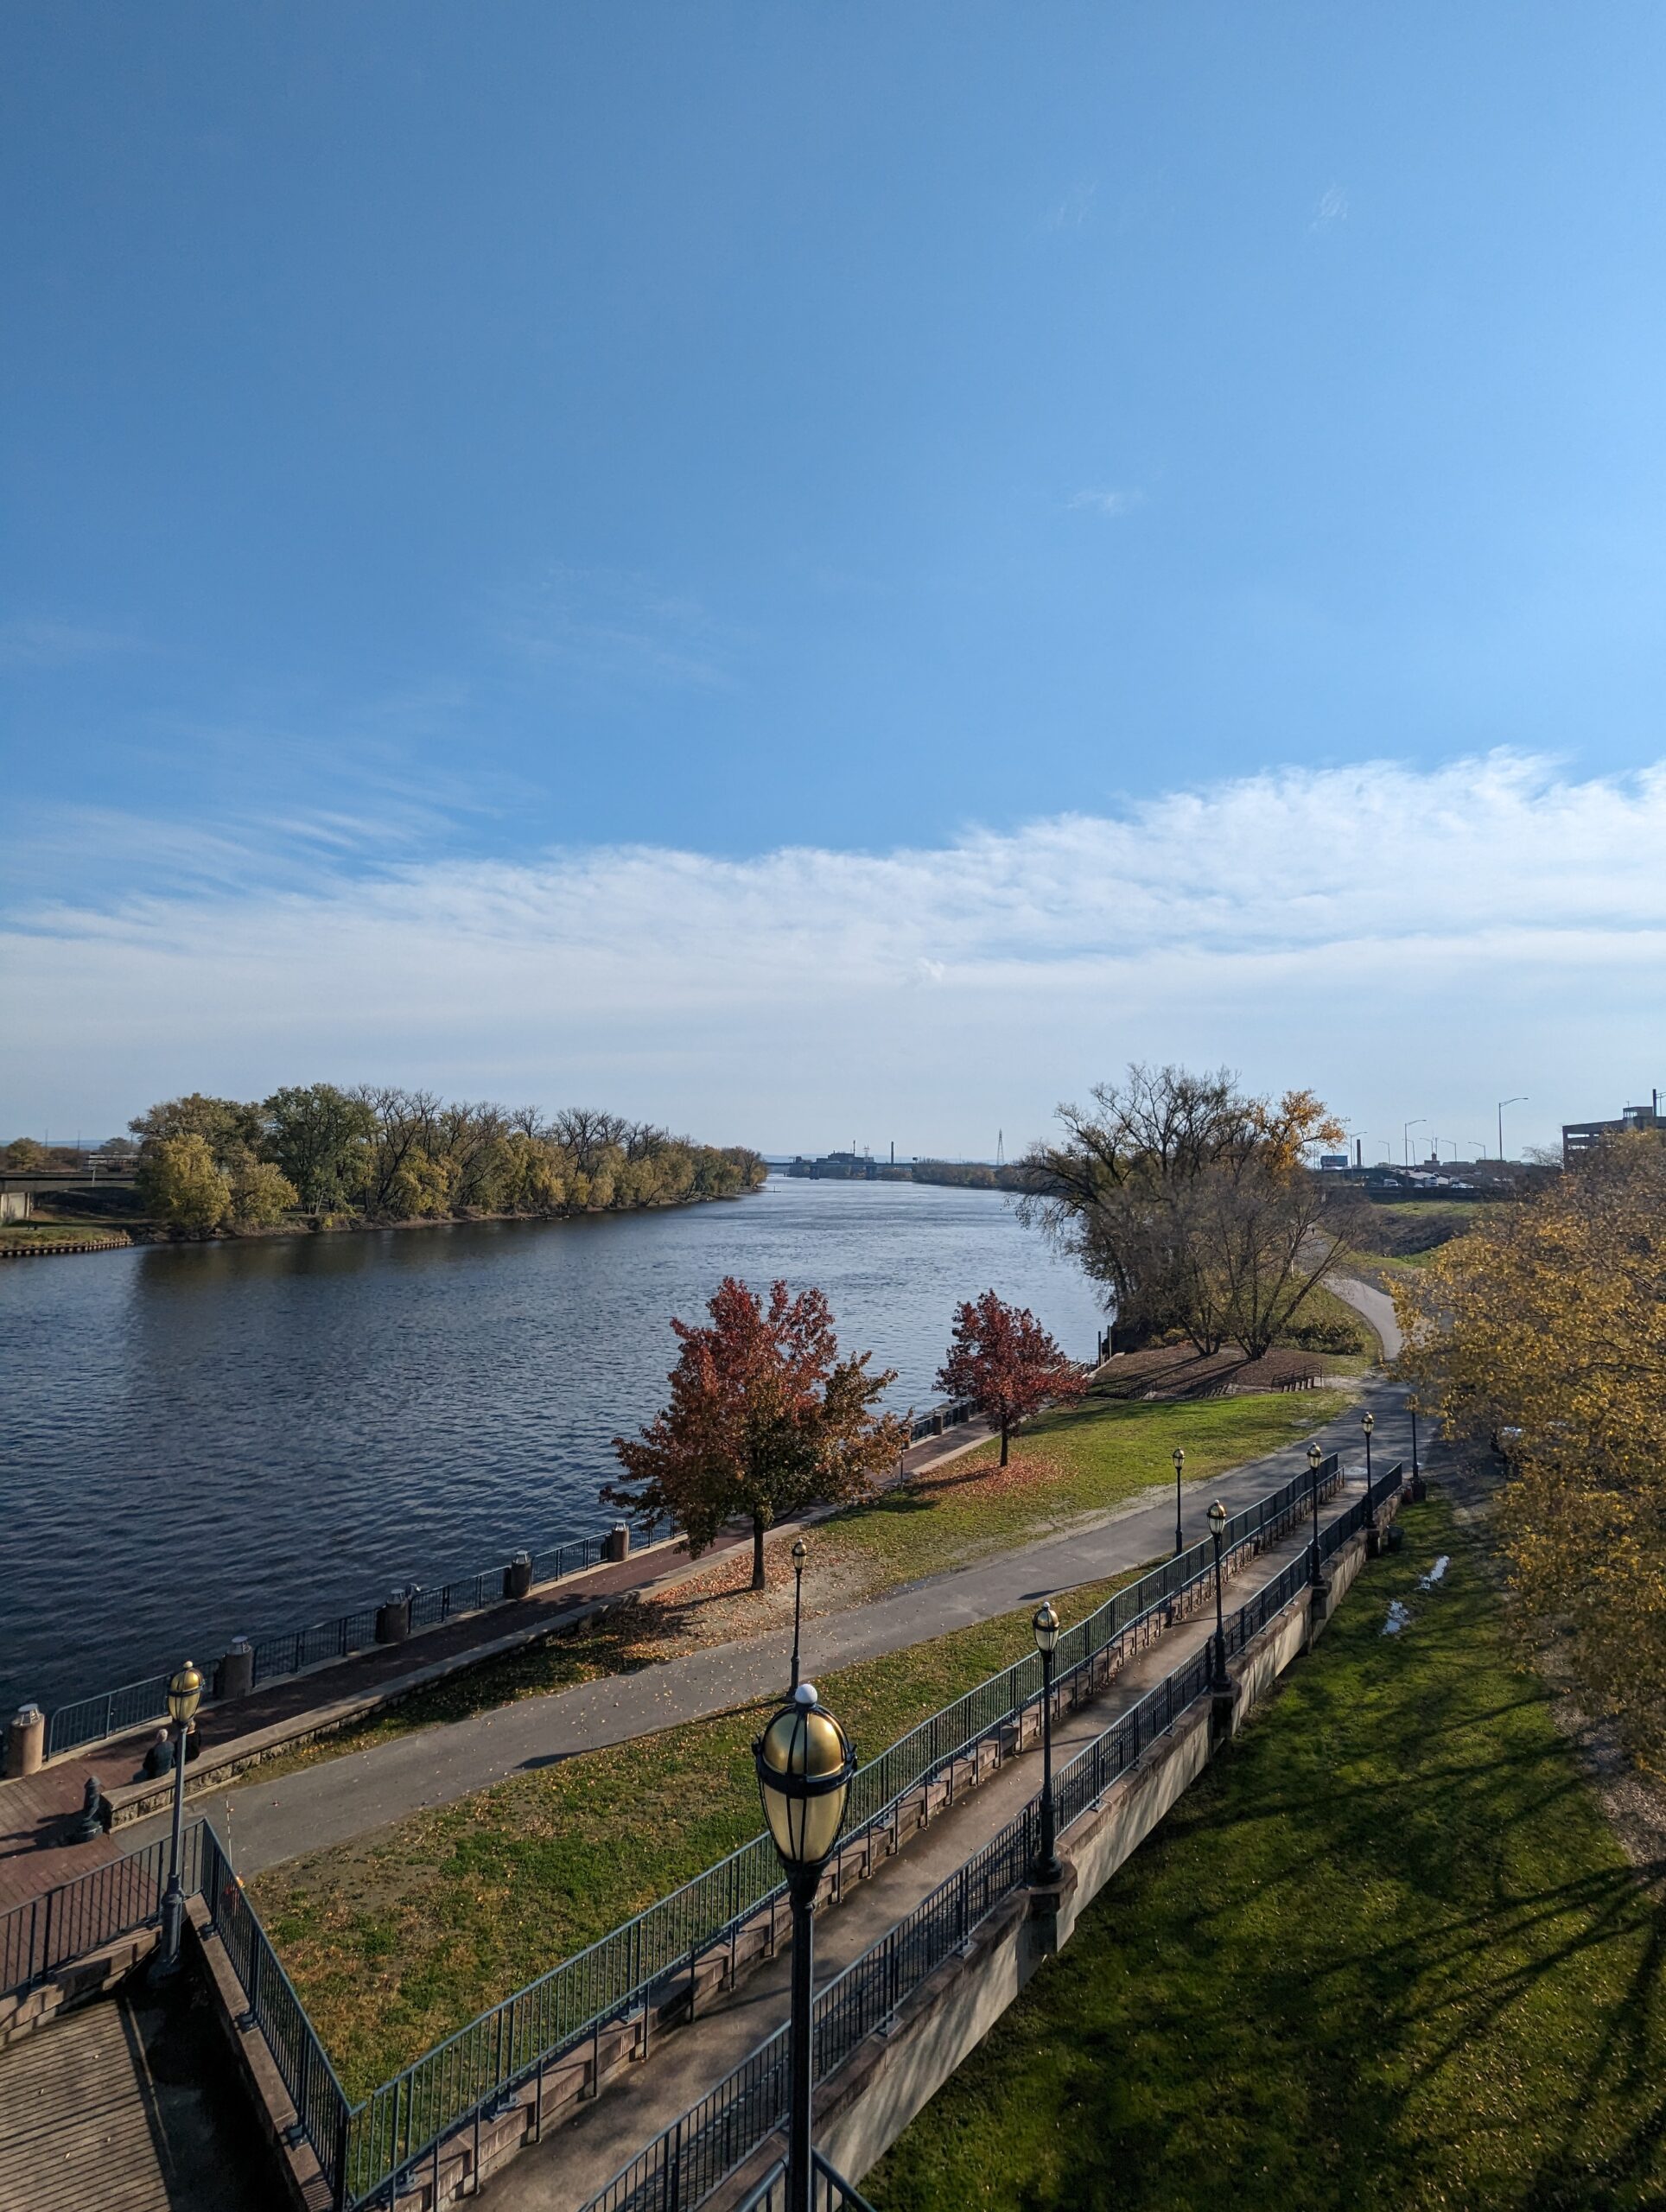 An Urbanist’s Guide to Hartford